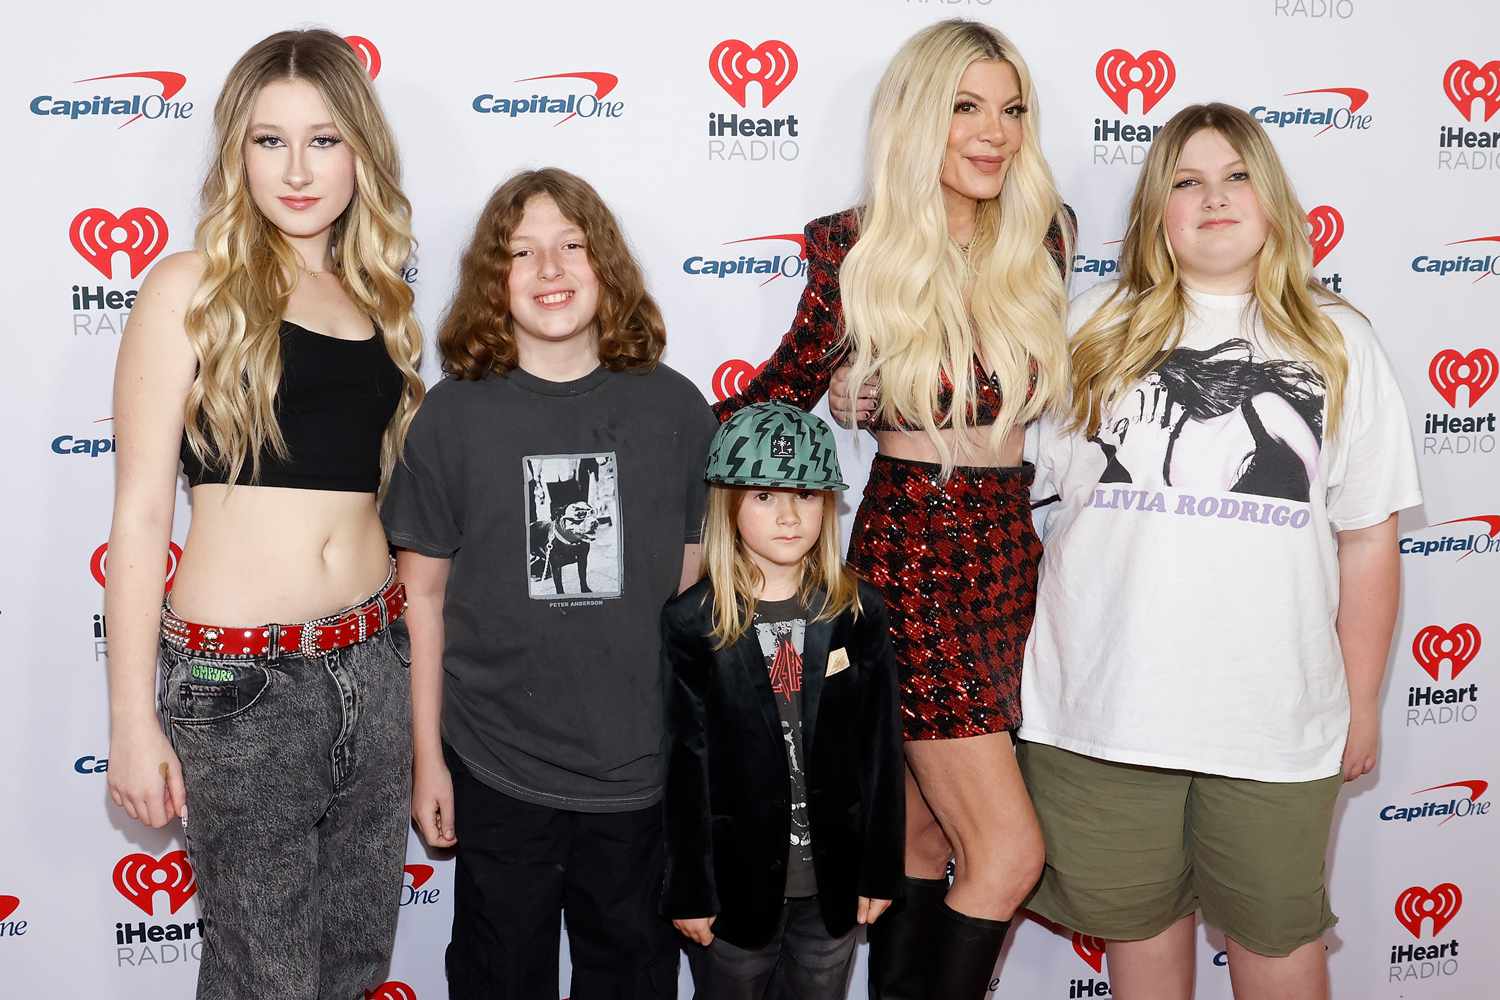 Tori Spelling Reveals Her Kids' Surprise Gift for the 'Anti-Mother's Day' They Planned